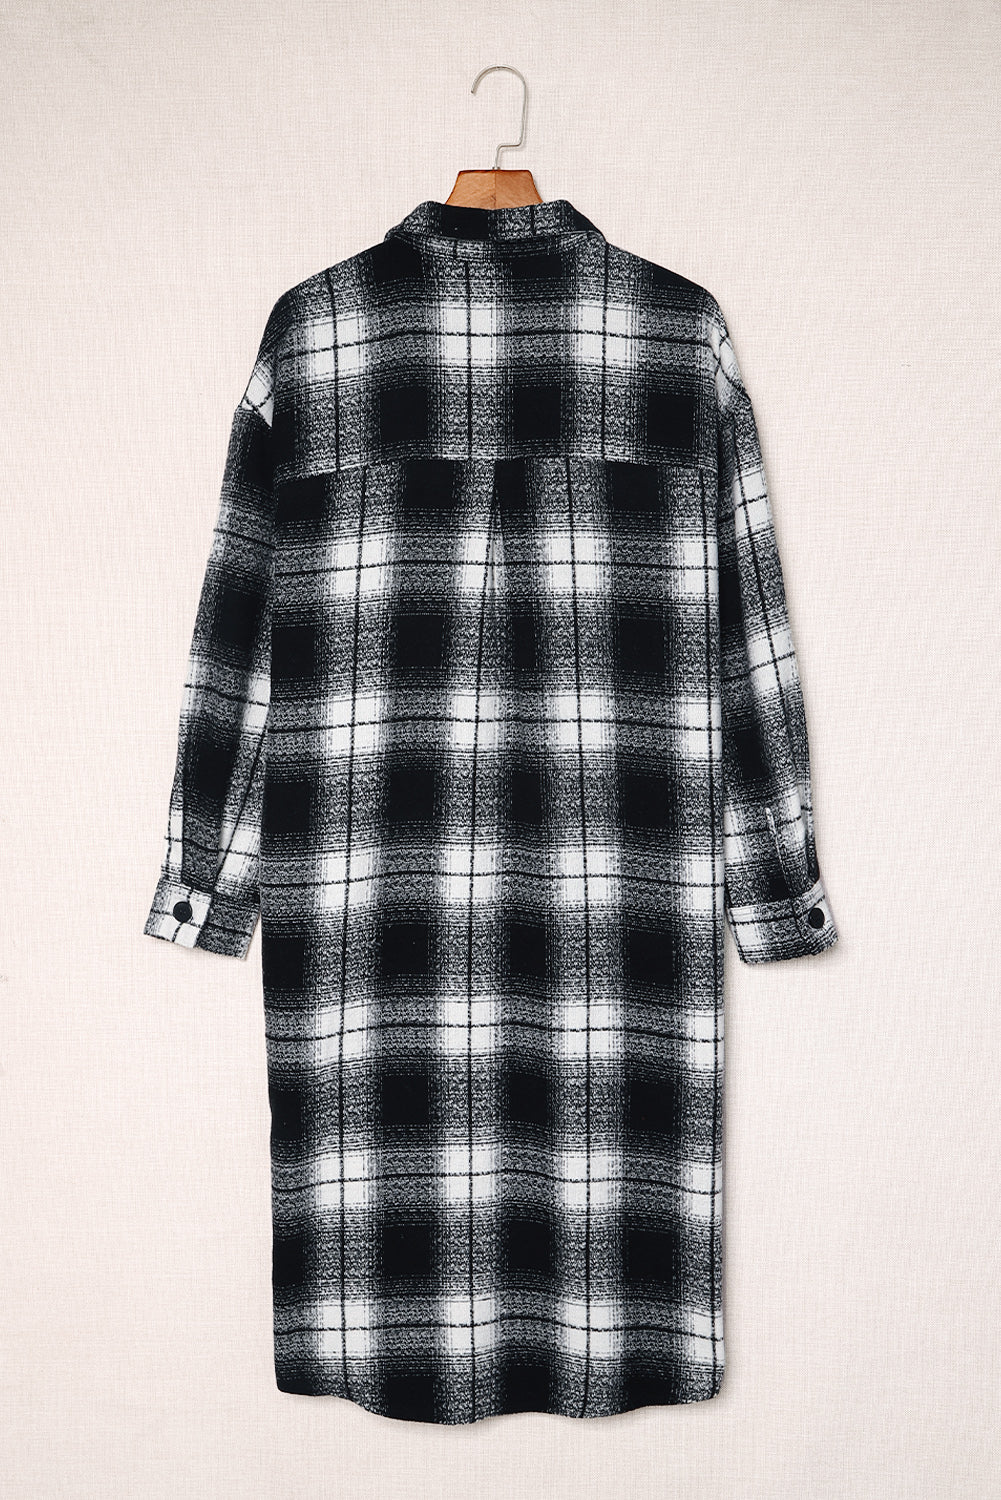 Plaid Print Buttoned Pocketed Long Sleeve Long Coat